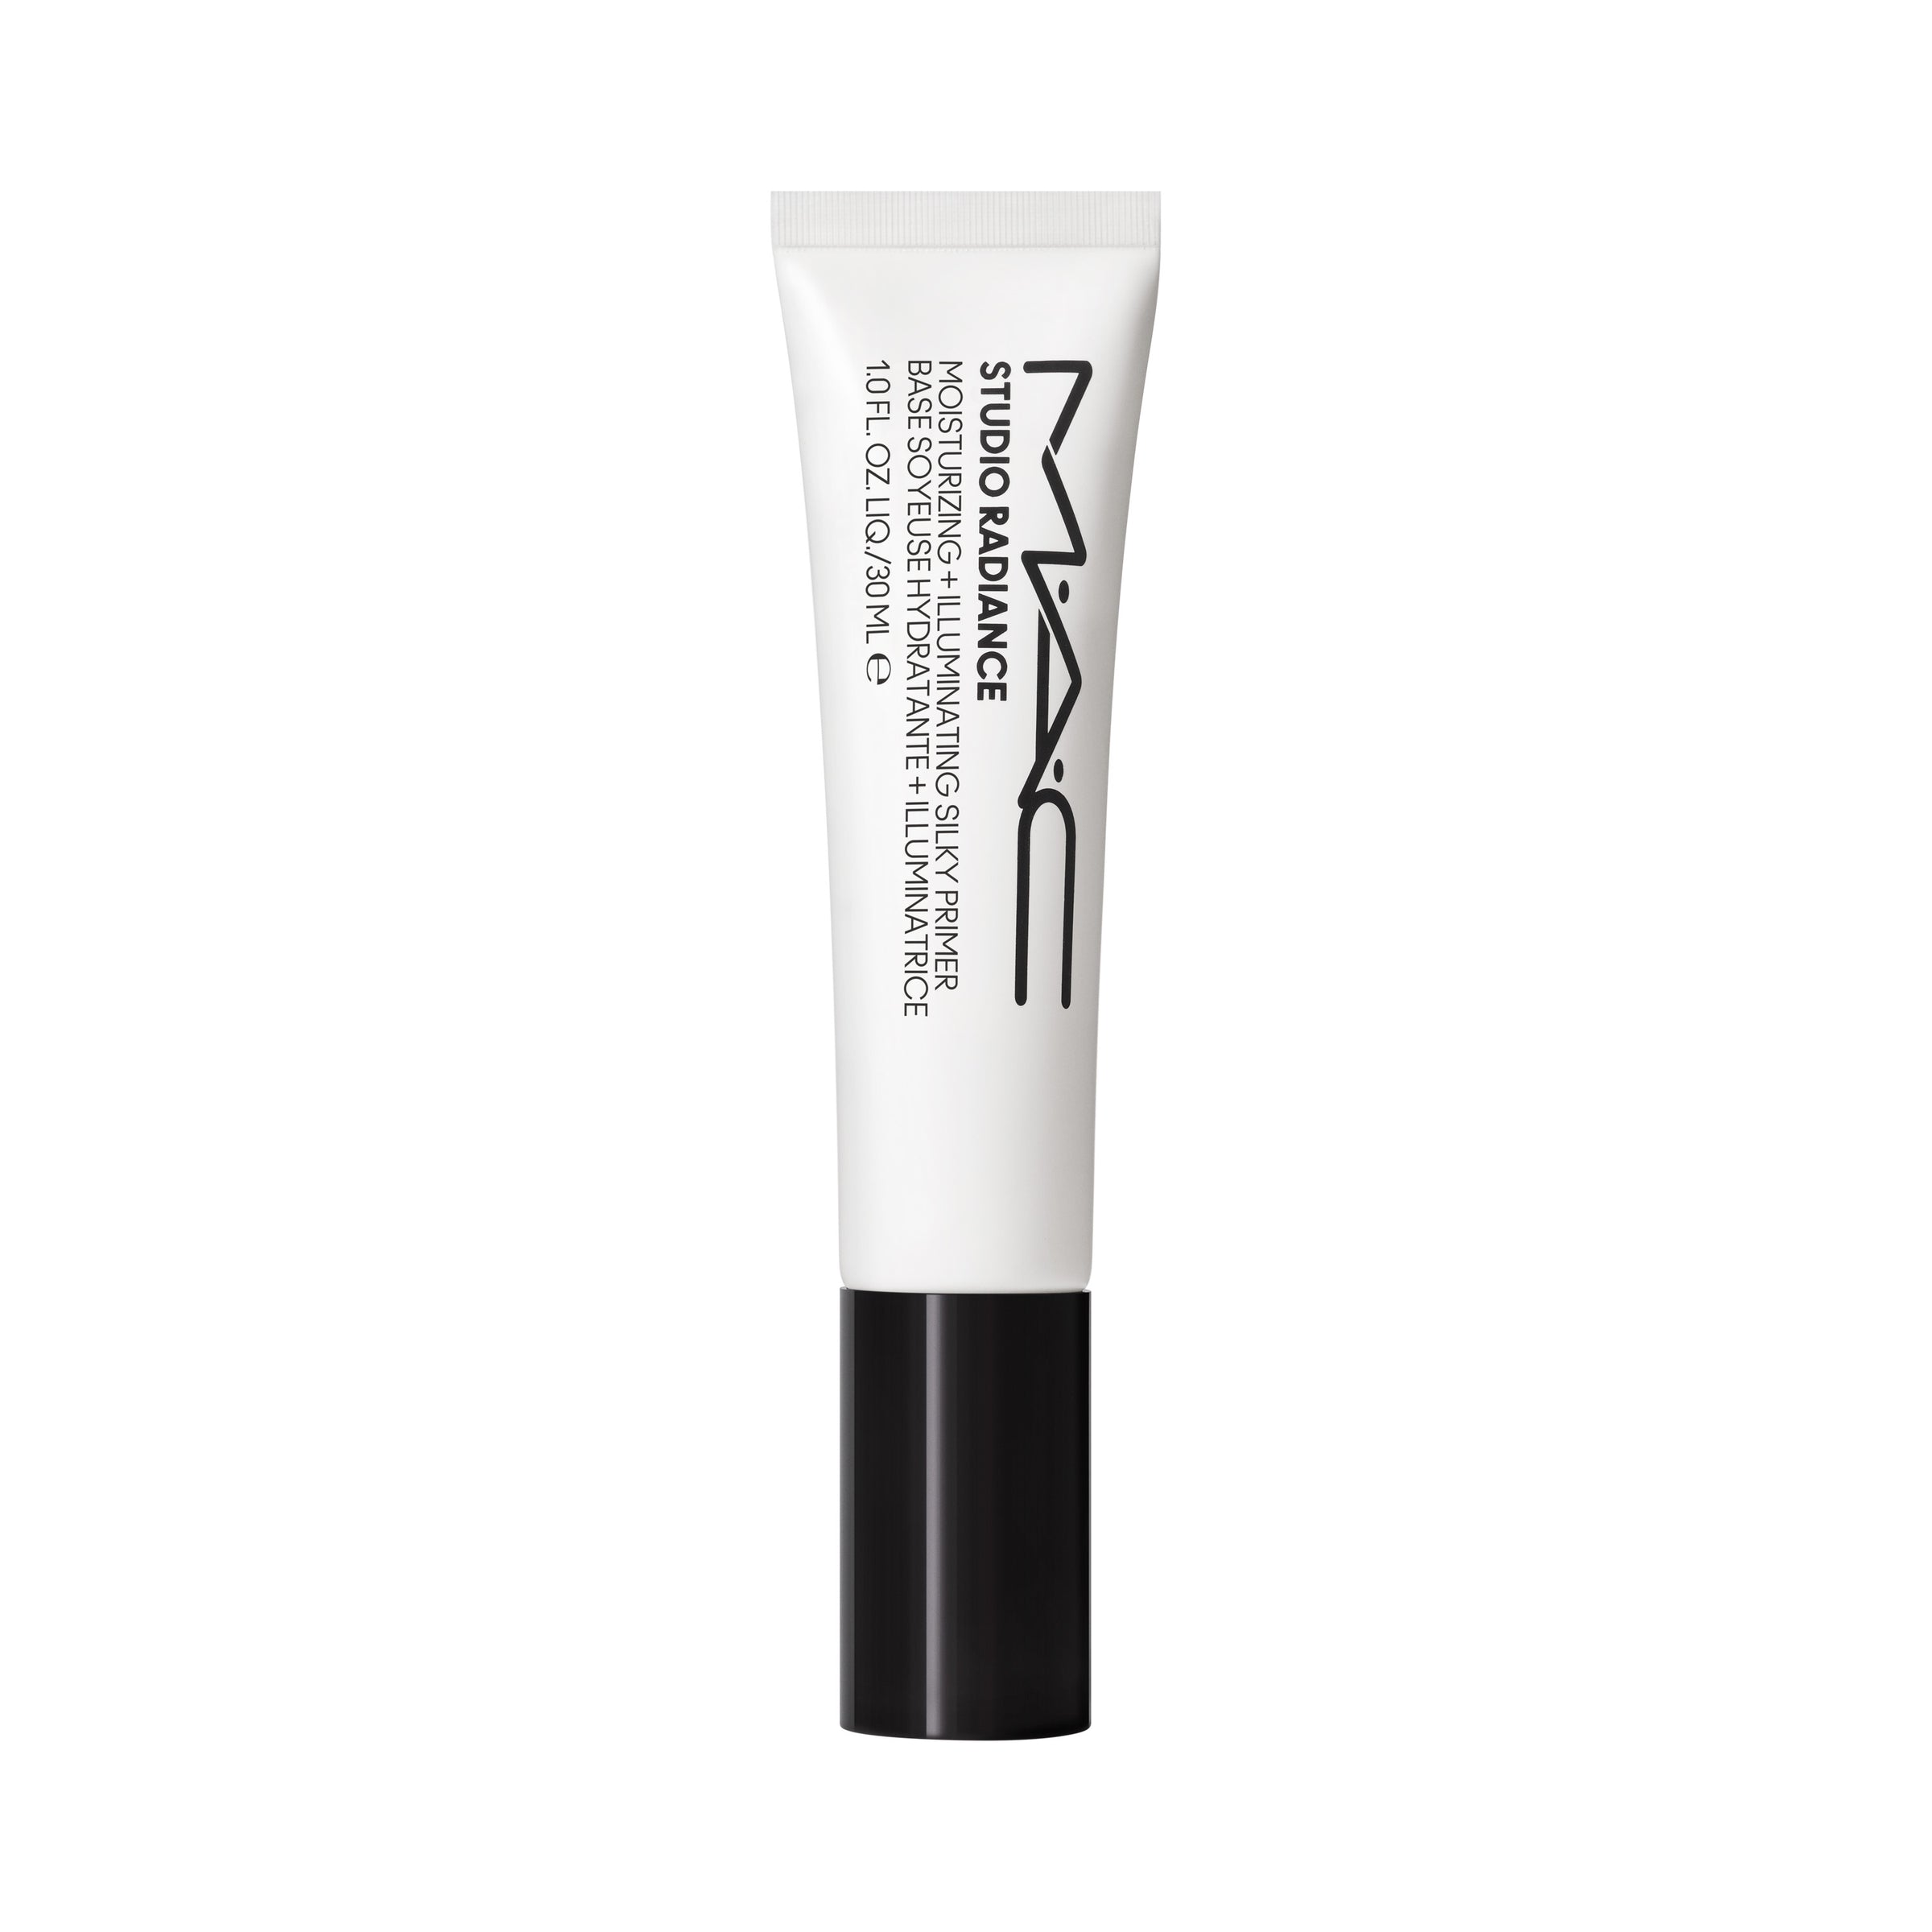 Shop The Latest Collection Of MAC Studio Radiance Moisturize In Lebanon